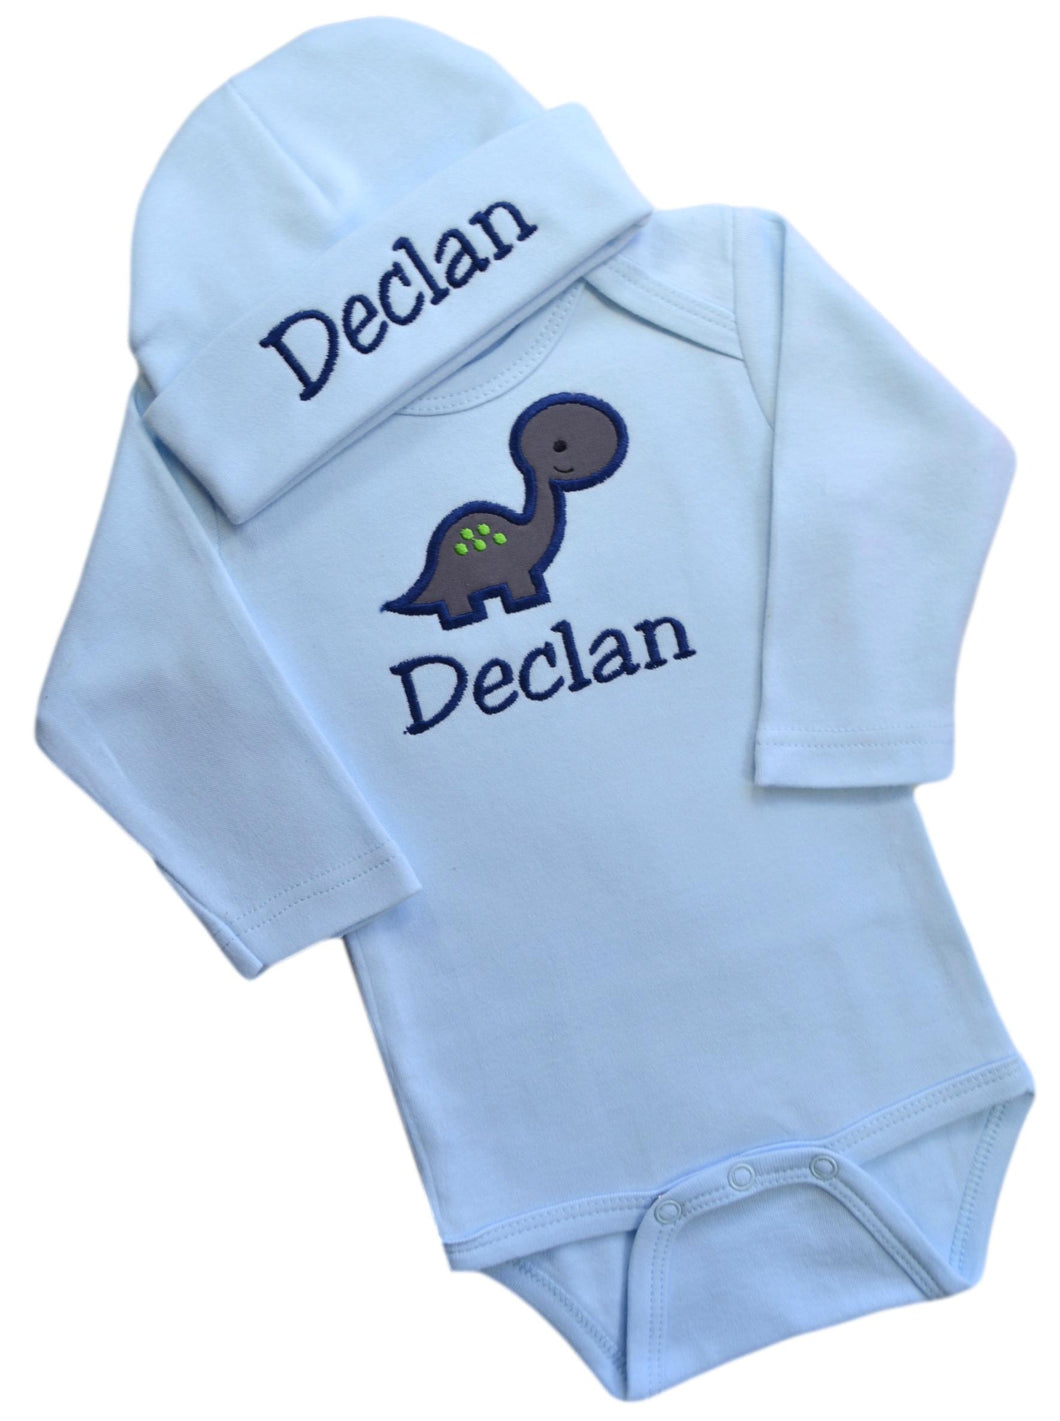 Personalized Embroidered Baby Boys Dinosaur Bodysuit with Matching Cotton Beanie Hat